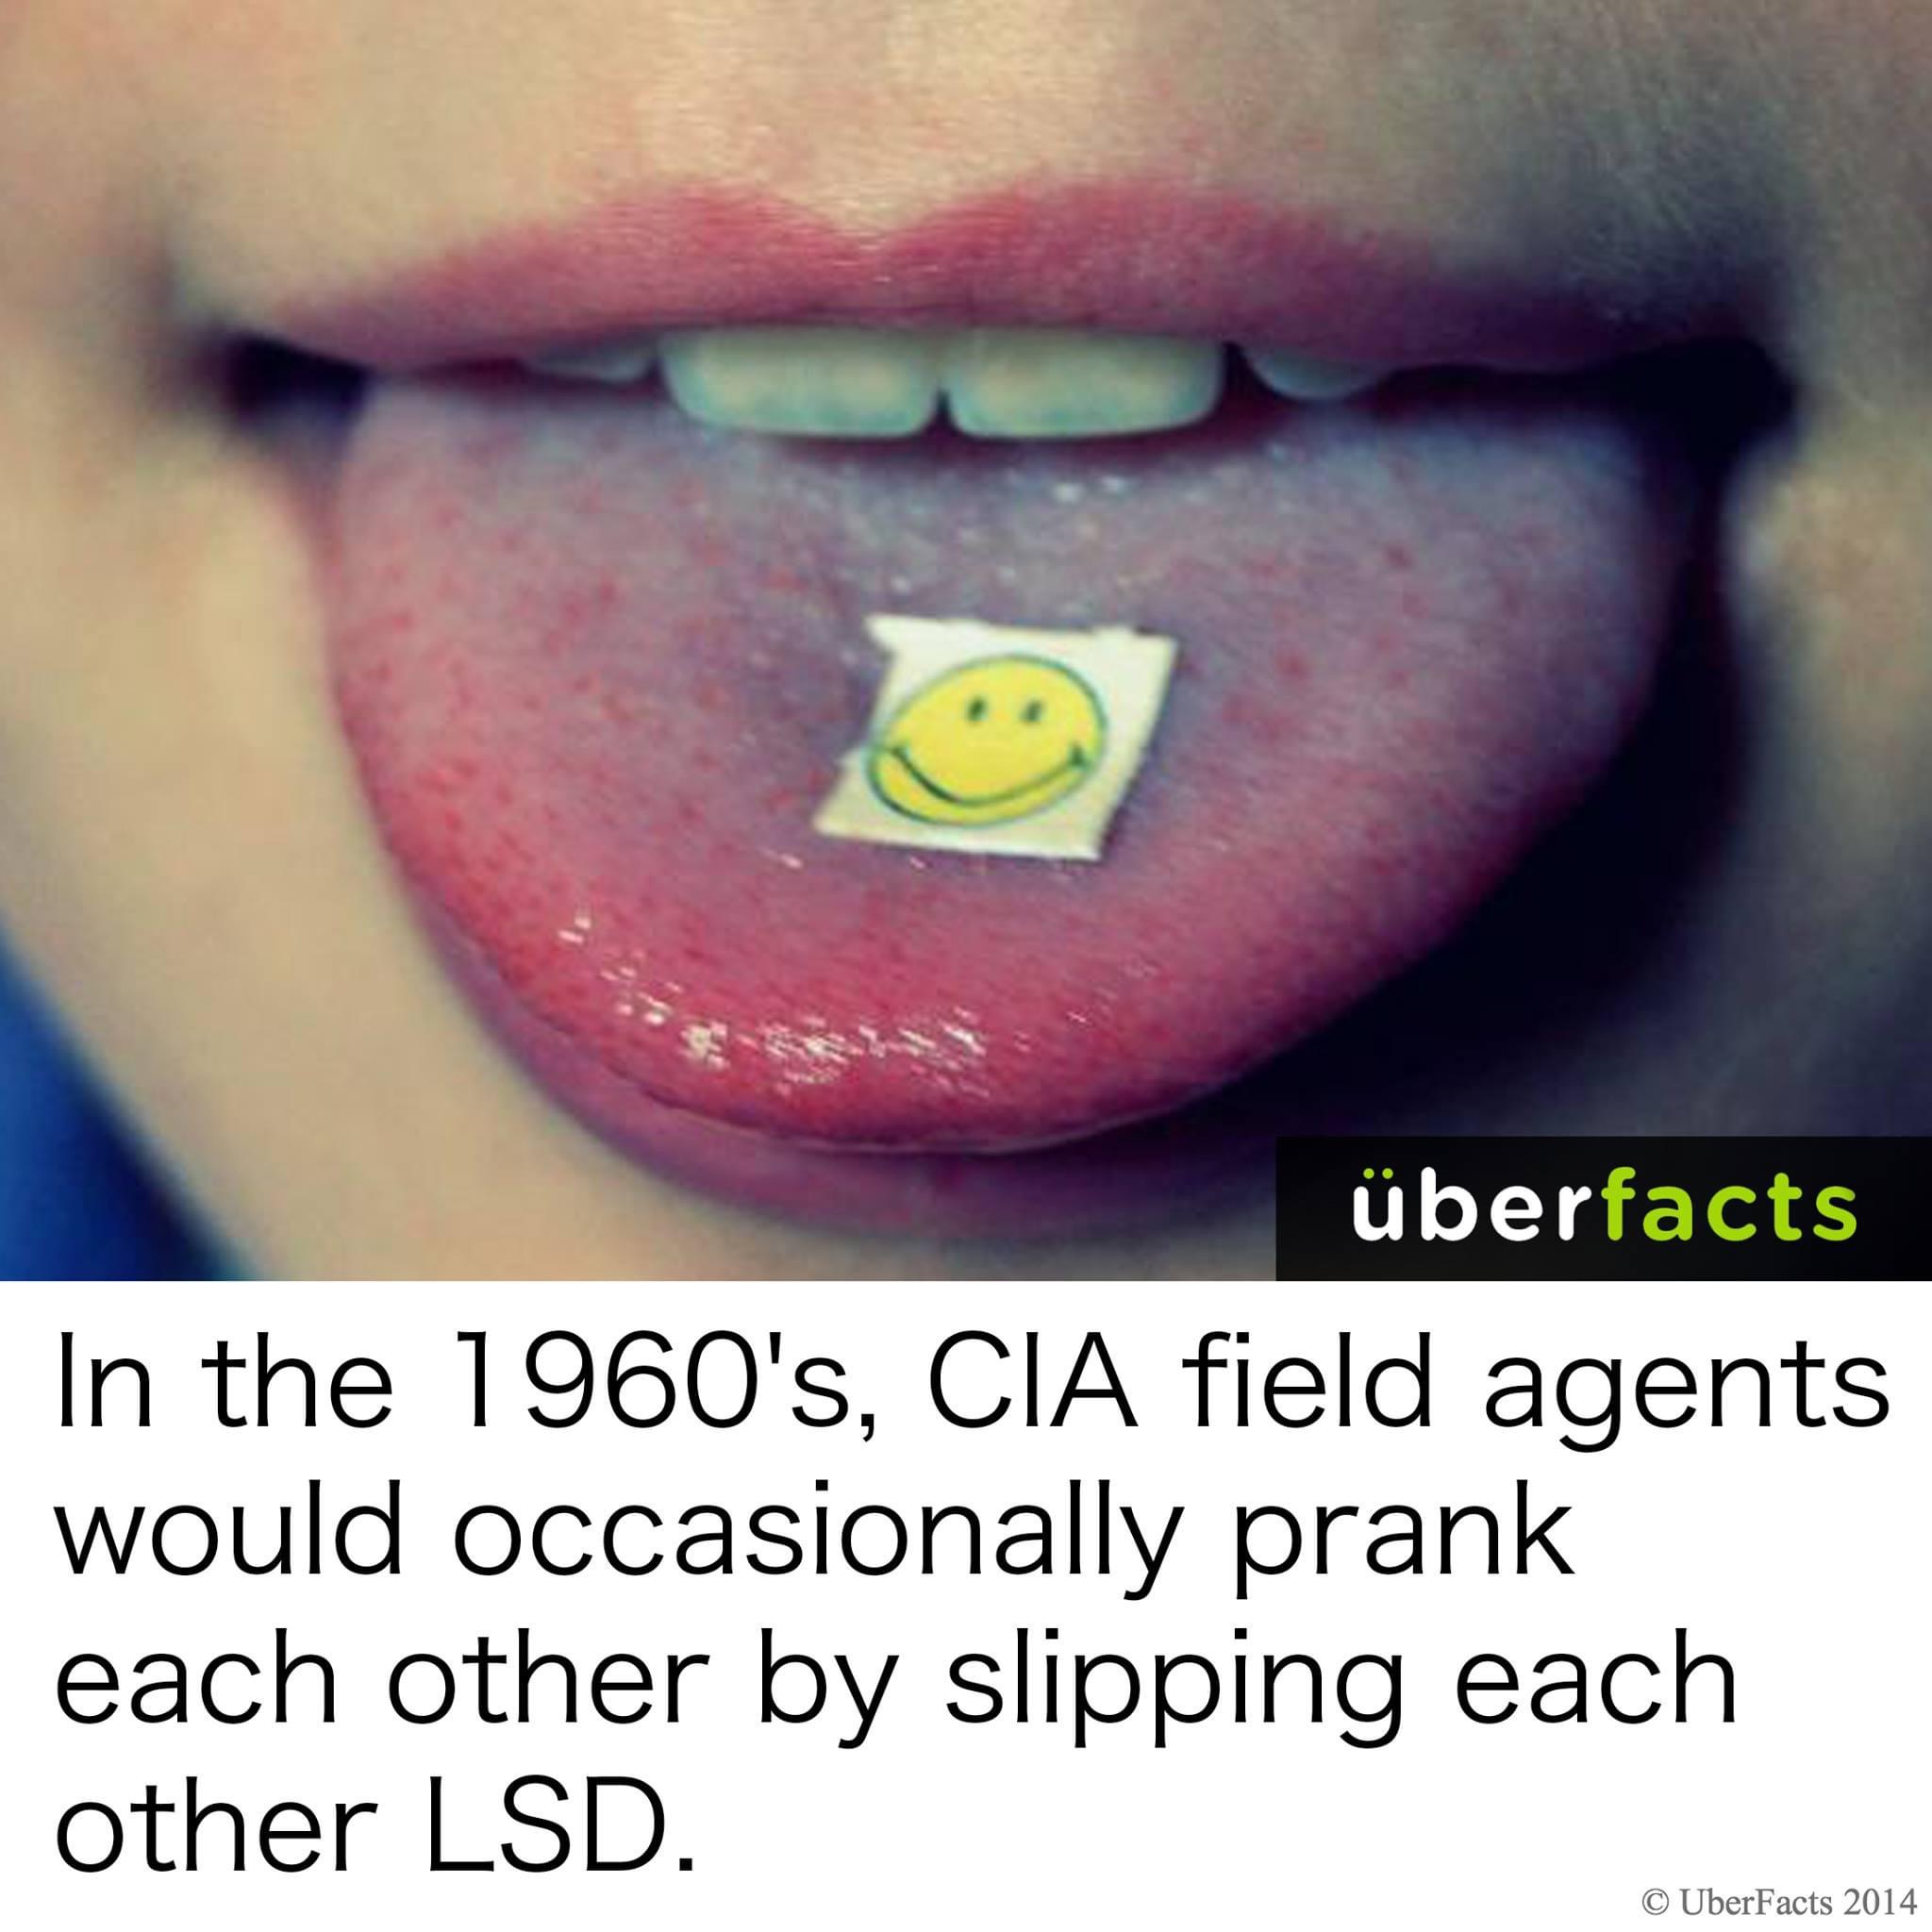 take lsd - berfacts In the 1960's, Cia field agents would occasionally prank each other by slipping each other Lsd. UberFacts 2014